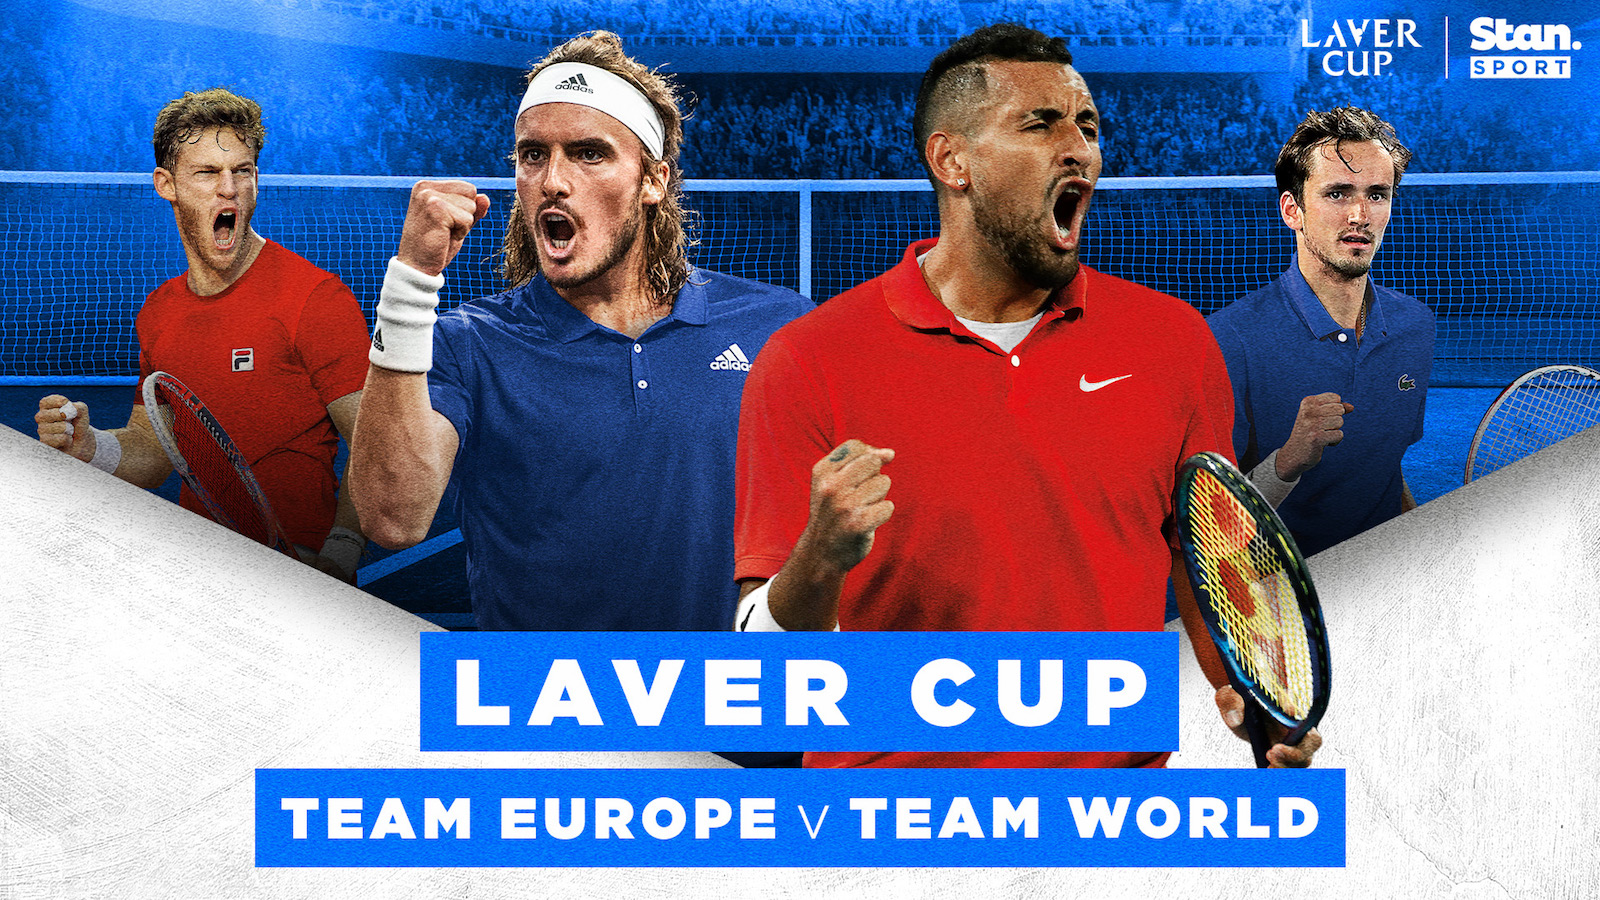 Stan Sport adds Laver Cup tennis tournament featuring Nick Kyrgios